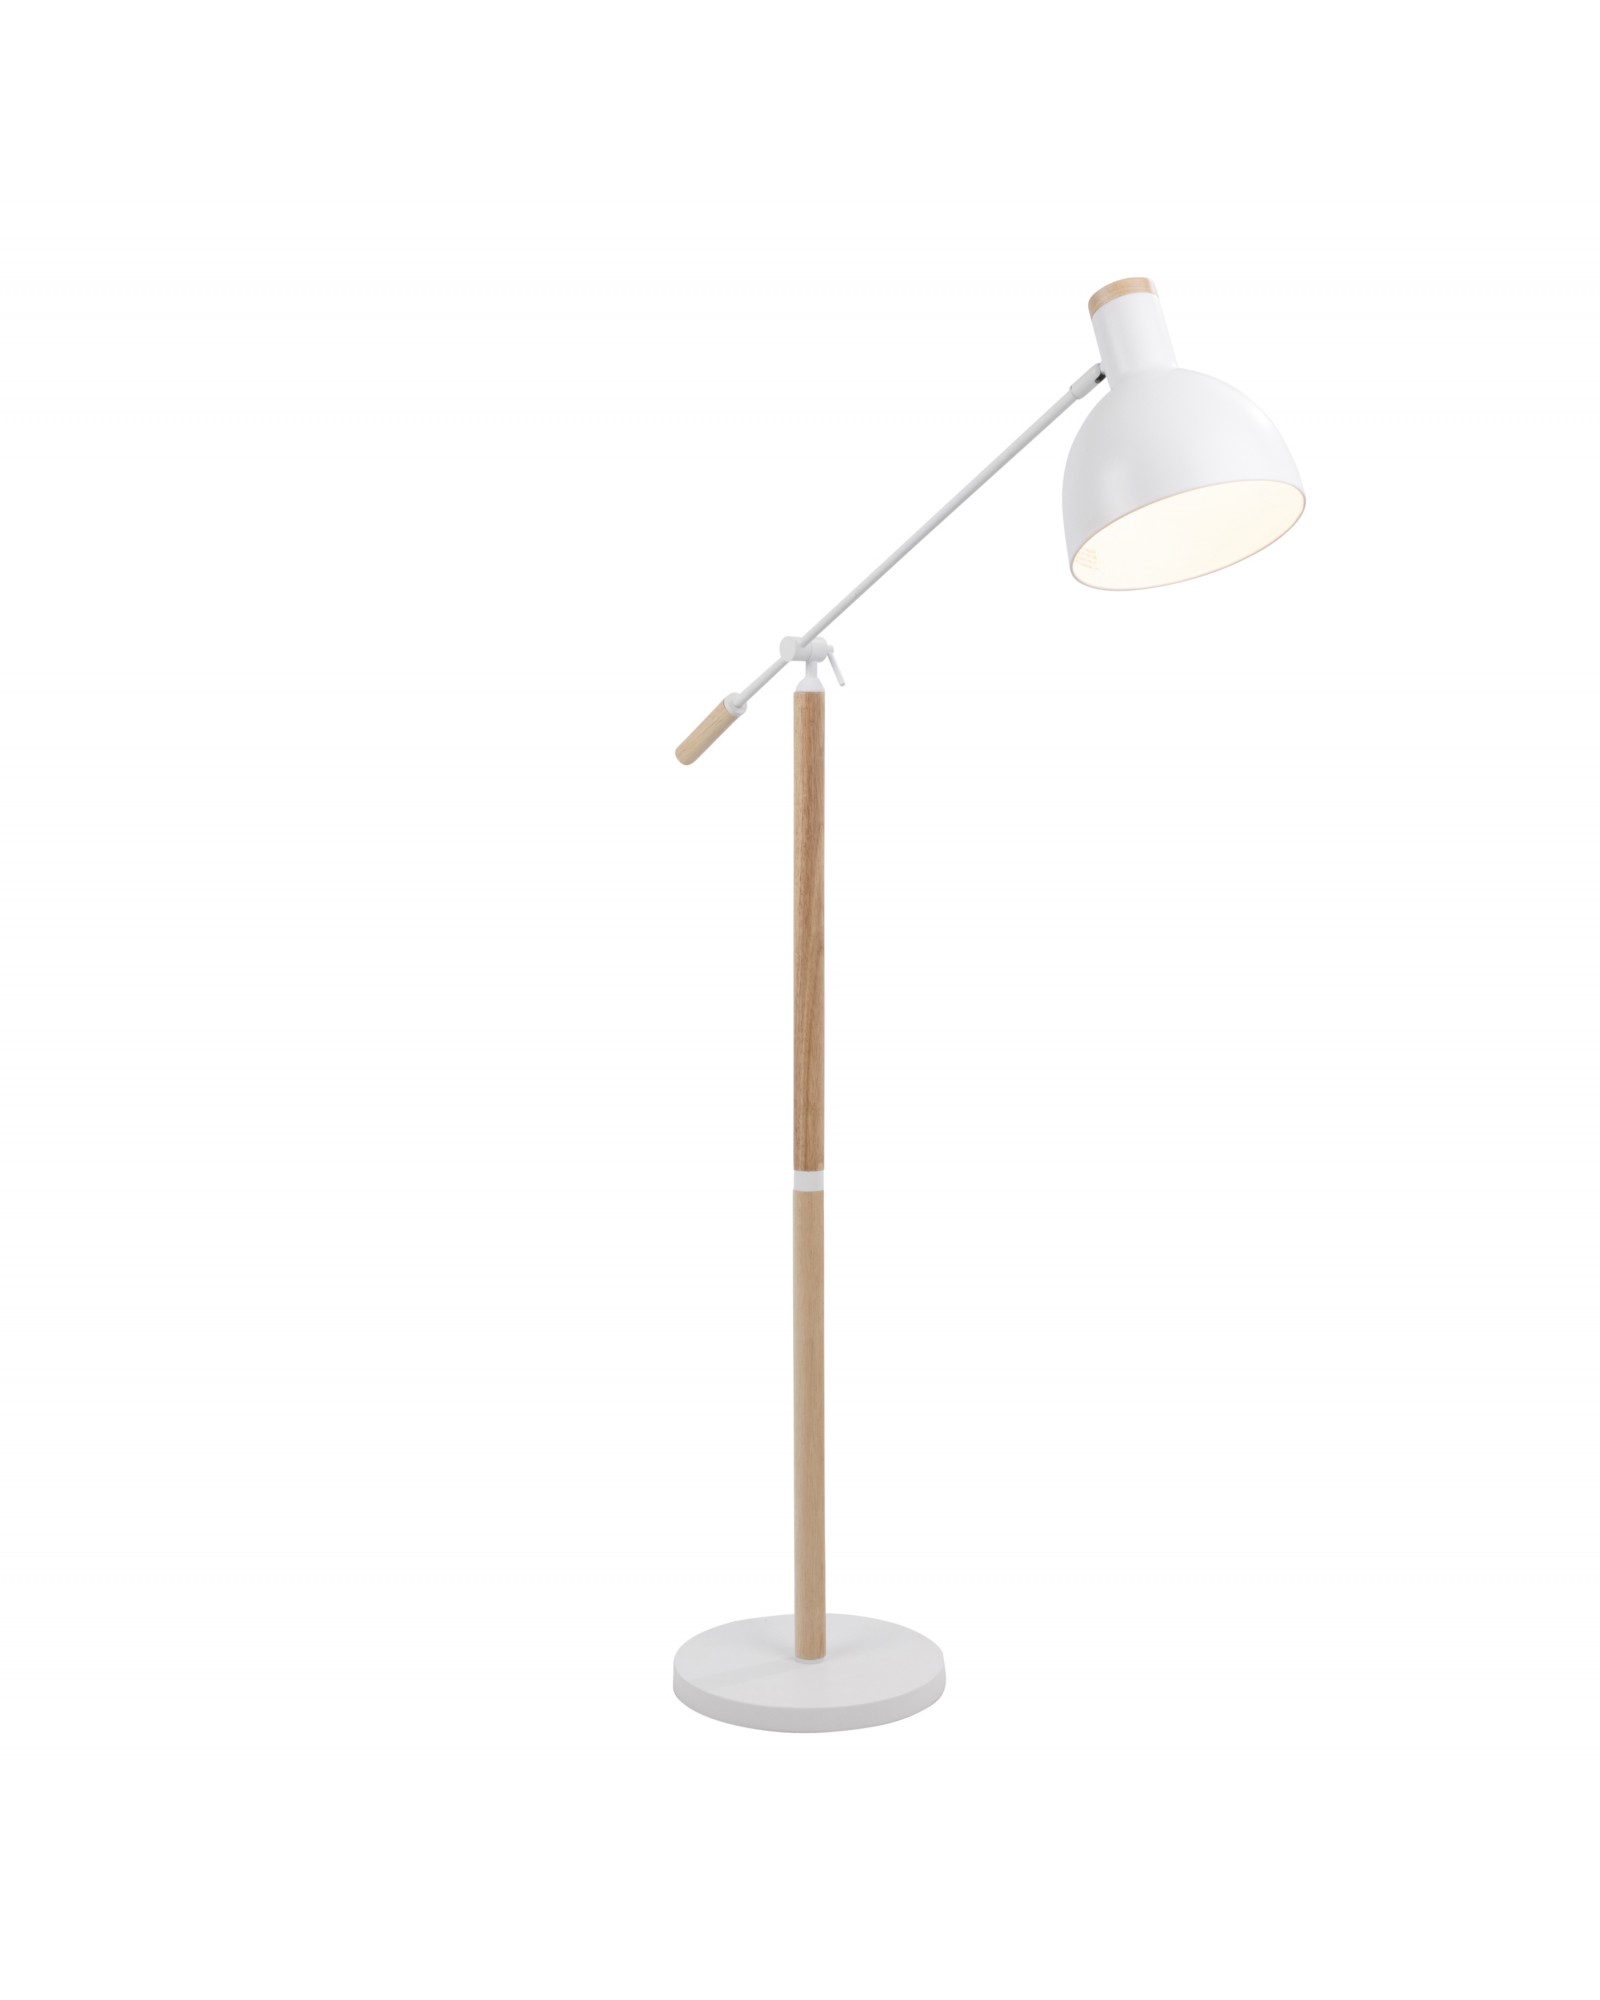 Pix Contemporary Floor Lamp in Natural Wood and Matte White